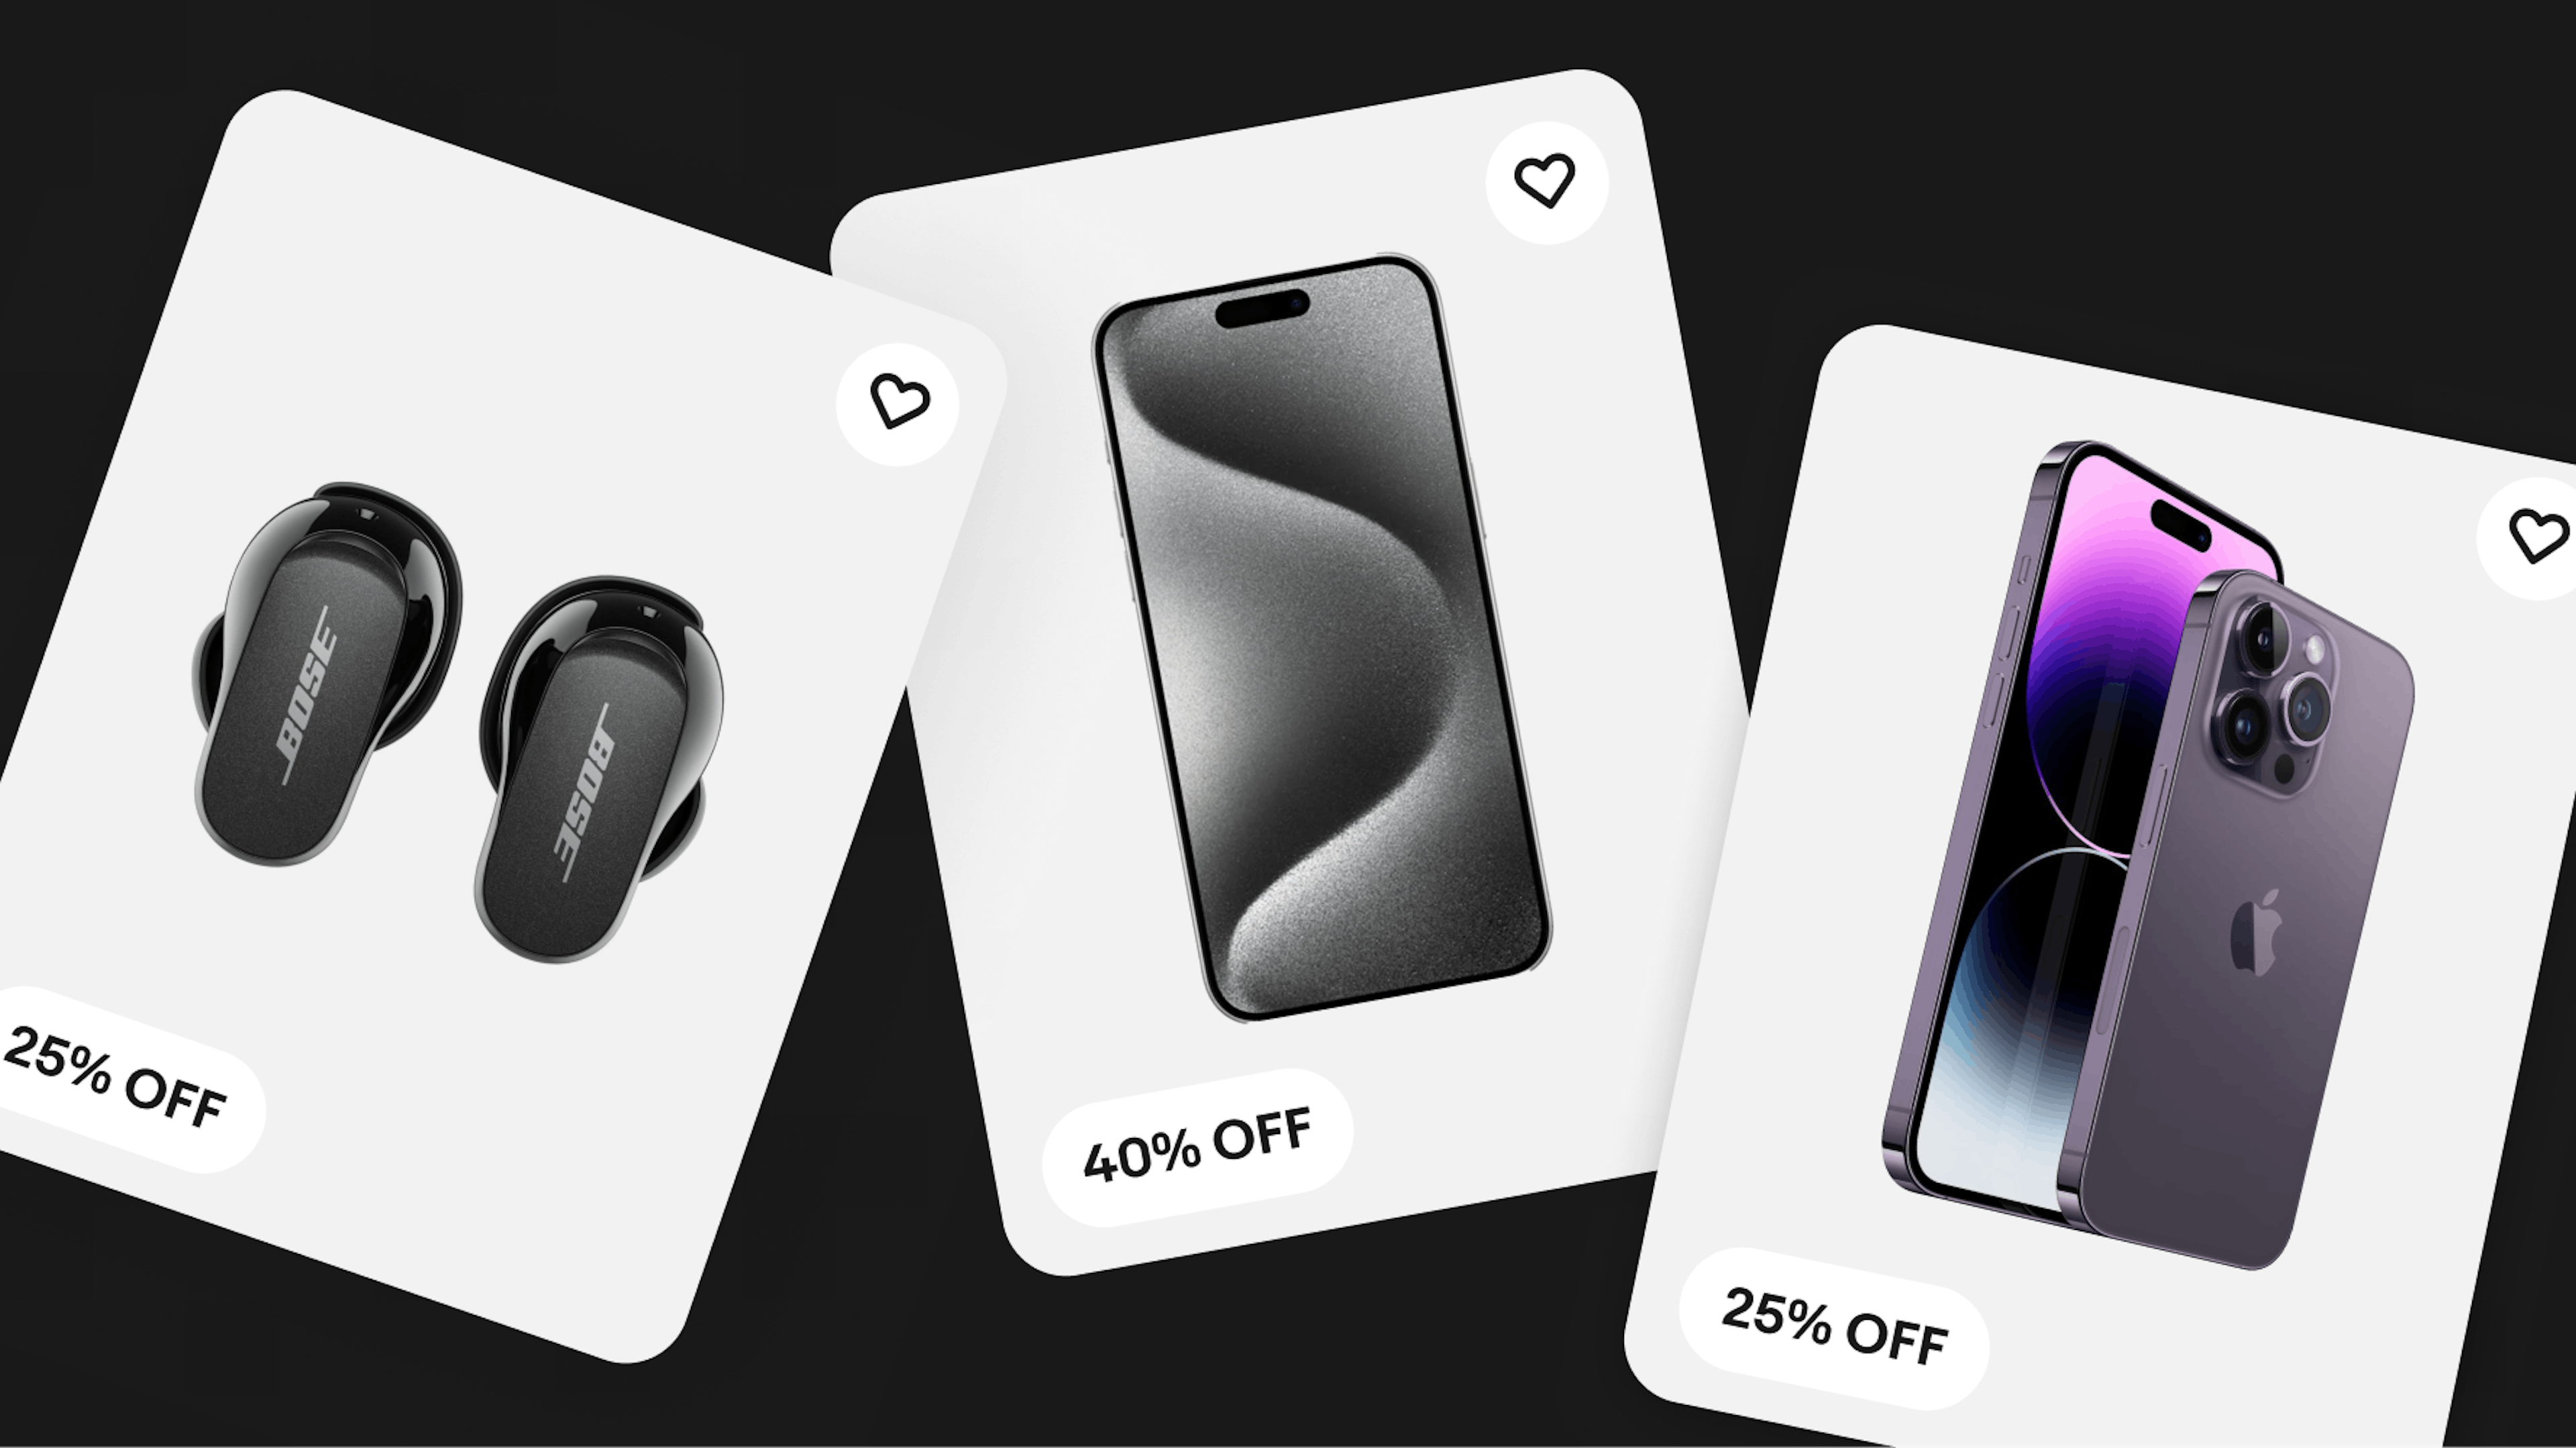 The image showcases three electronic products on sale: Bose earbuds at 25% off, a smartphone with a wavy pattern at 40% off, and an Apple iPhone at 25% off. Each product is displayed on a card with a heart icon, indicating a favorite or liked item.